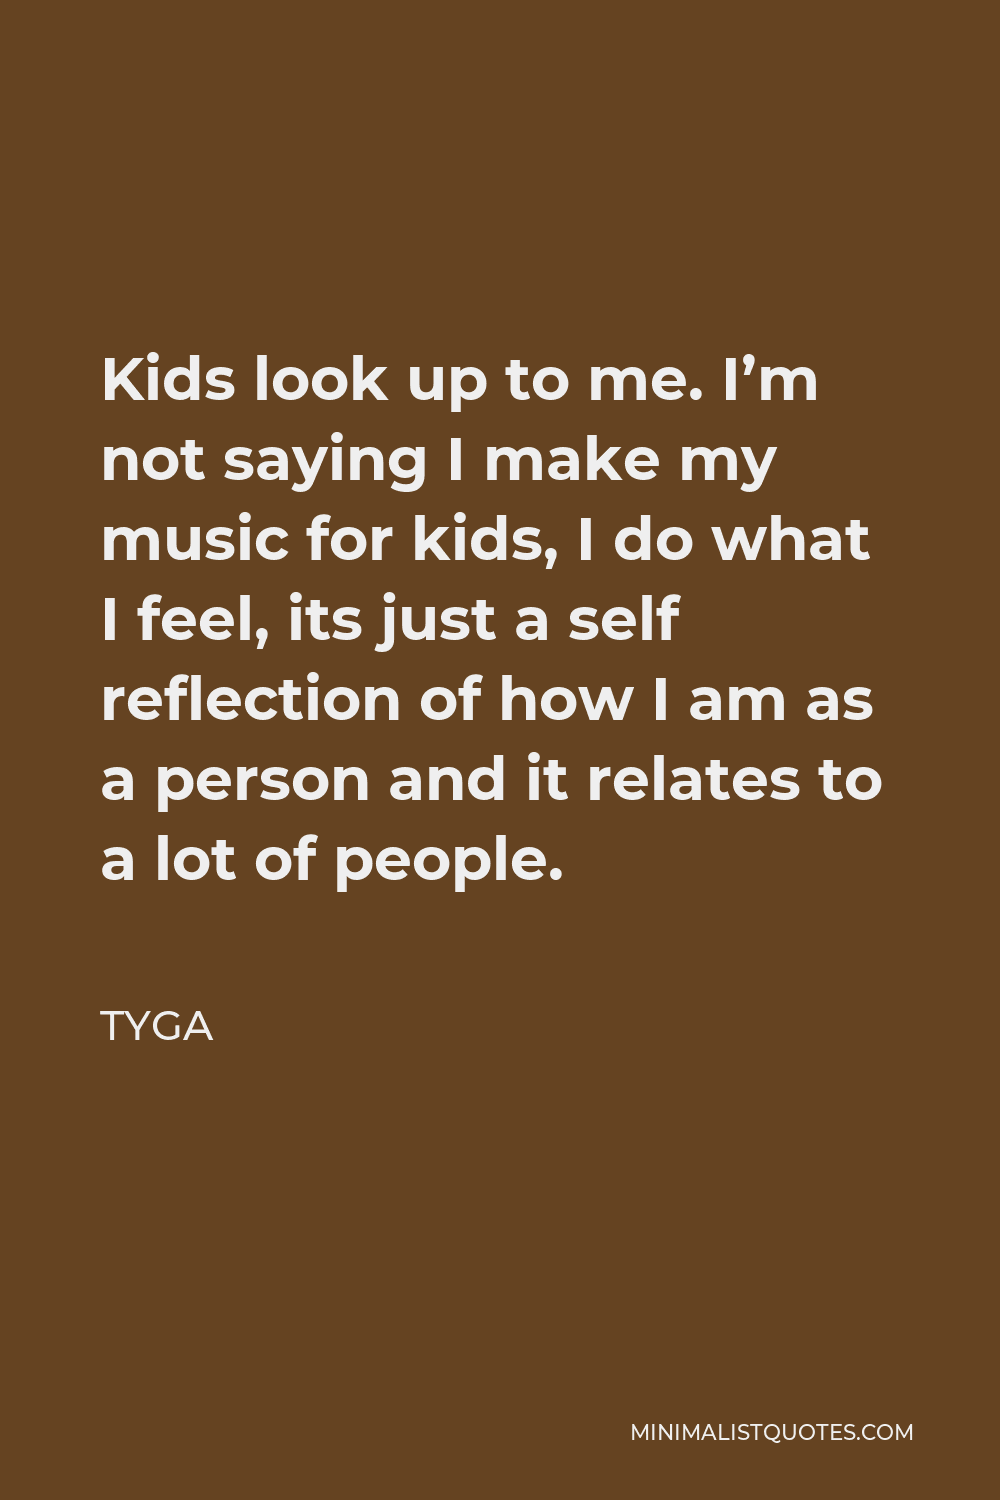 Tyga Quote - Kids look up to me. I’m not saying I make my music for kids, I do what I feel, its just a self reflection of how I am as a person and it relates to a lot of people.